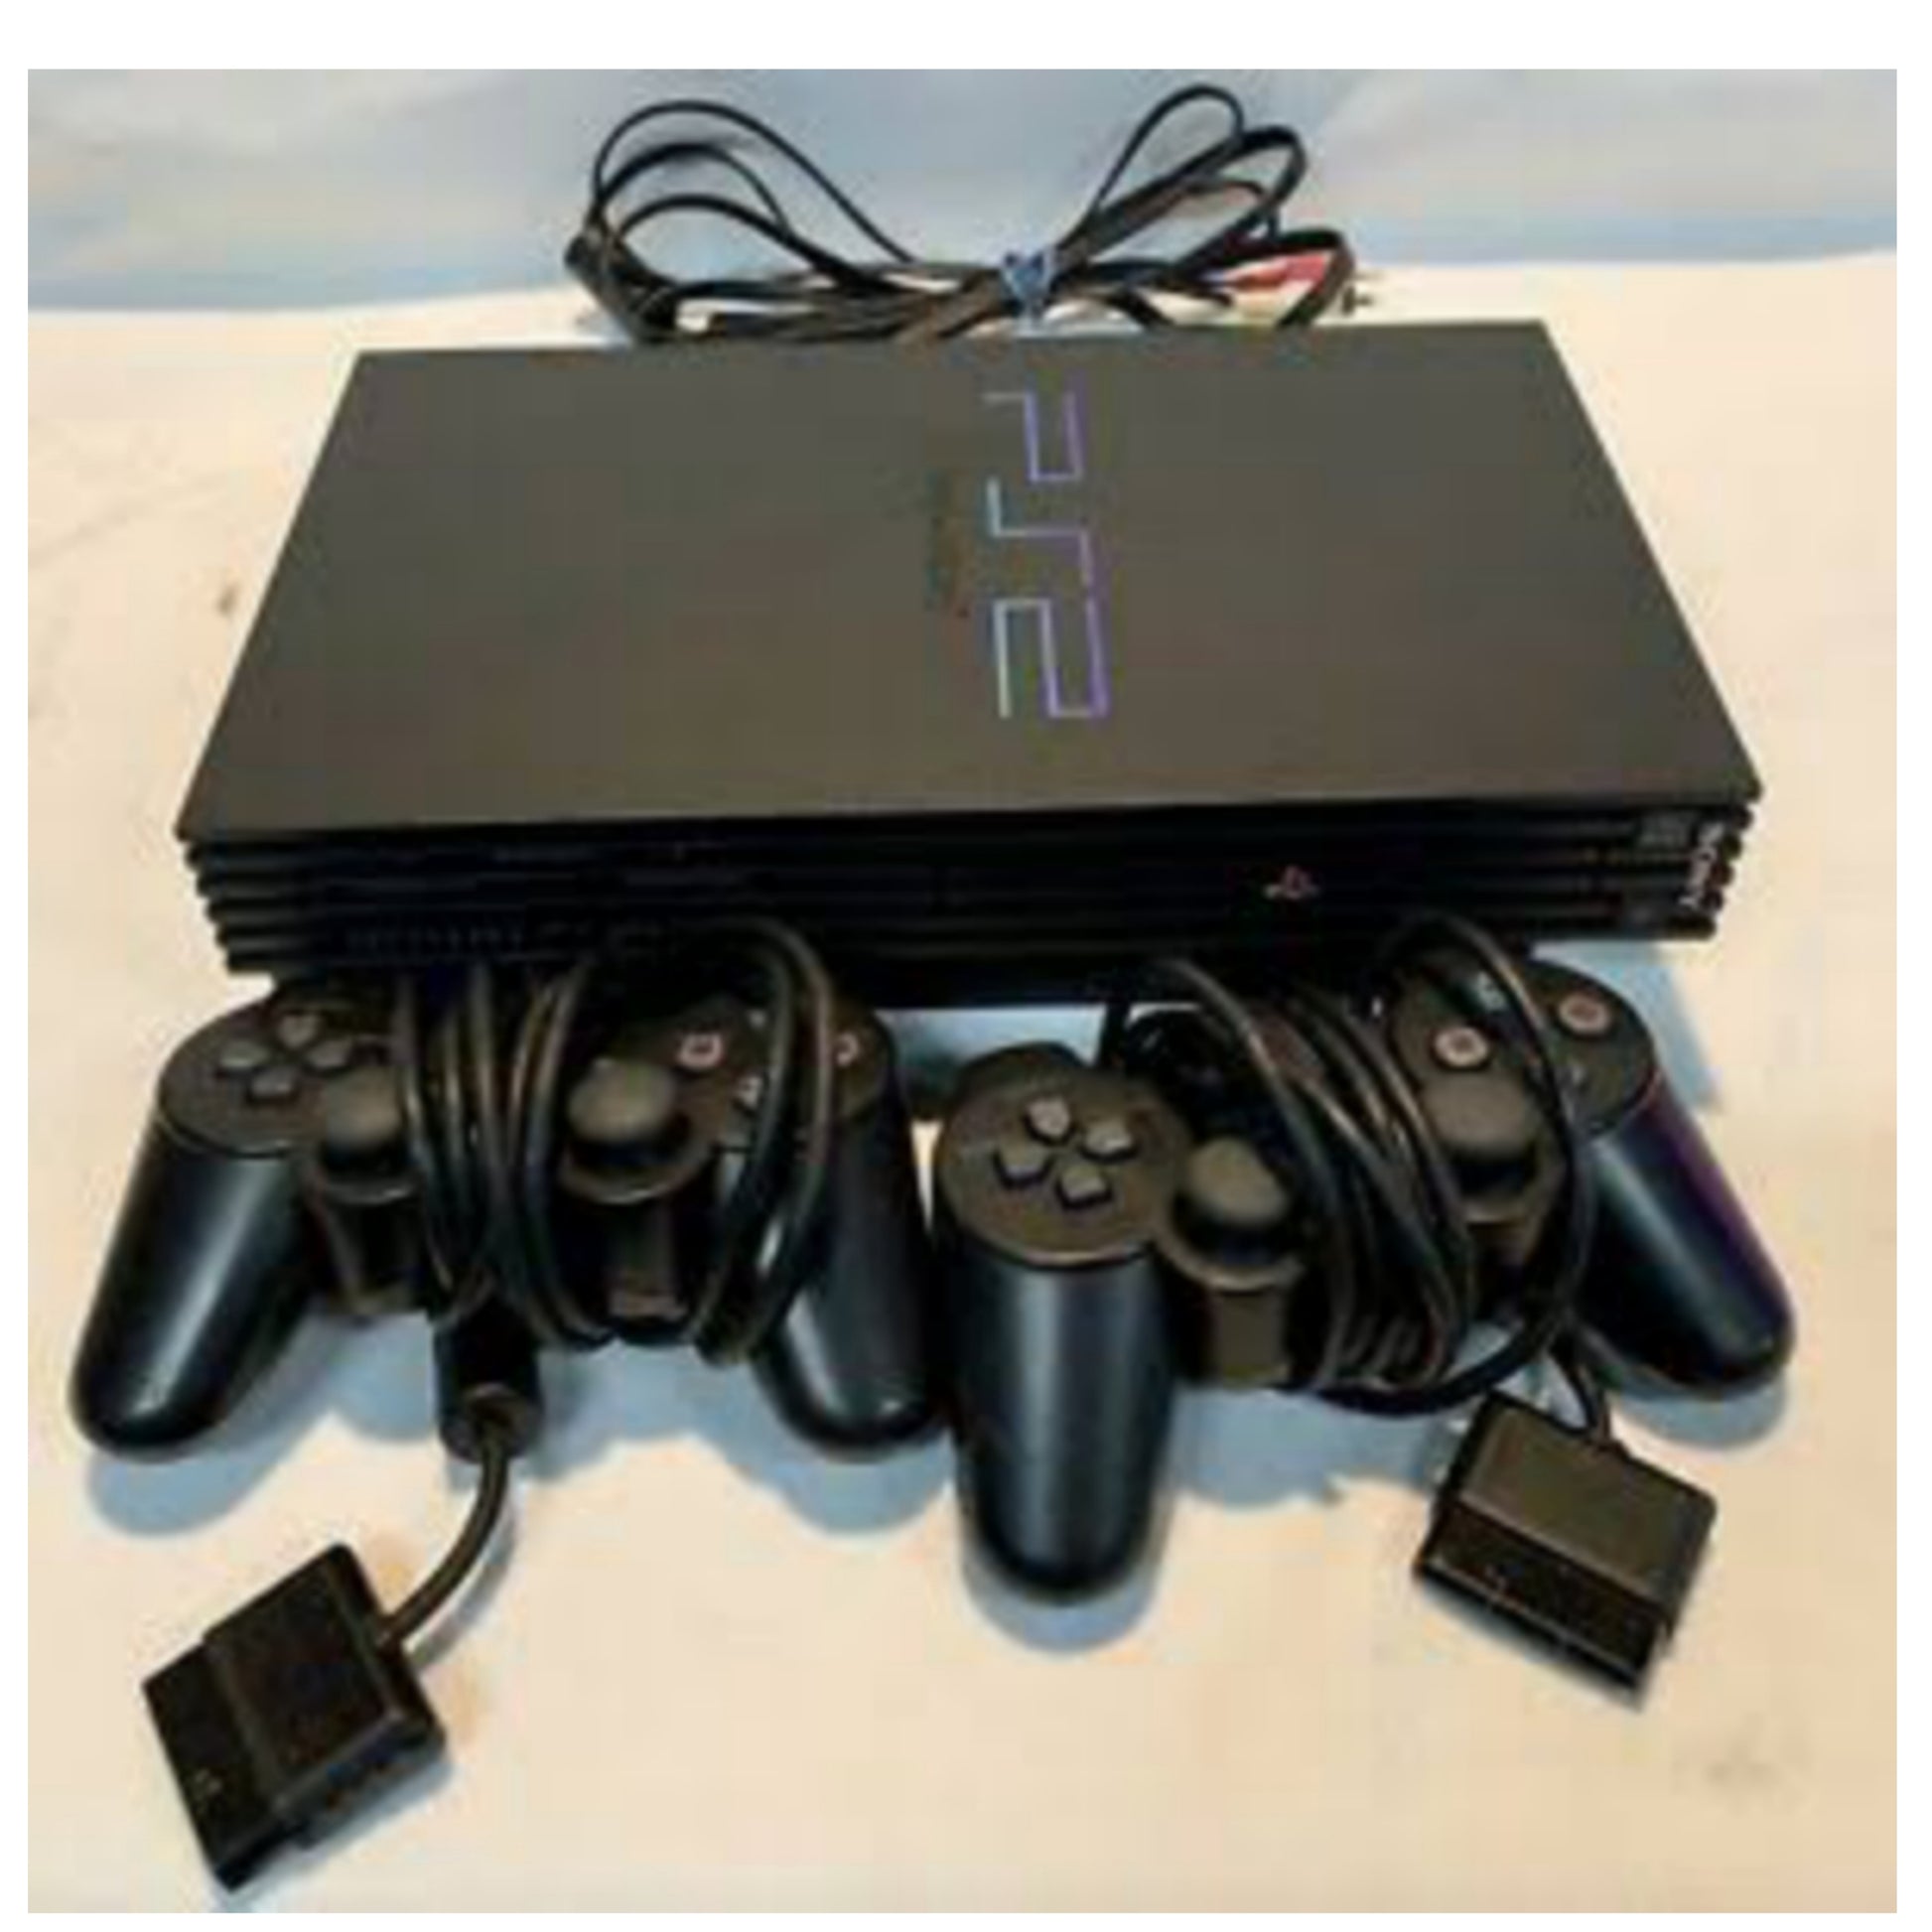 Sony Playstation 2 (PS2) Game Console Complete Set with 2